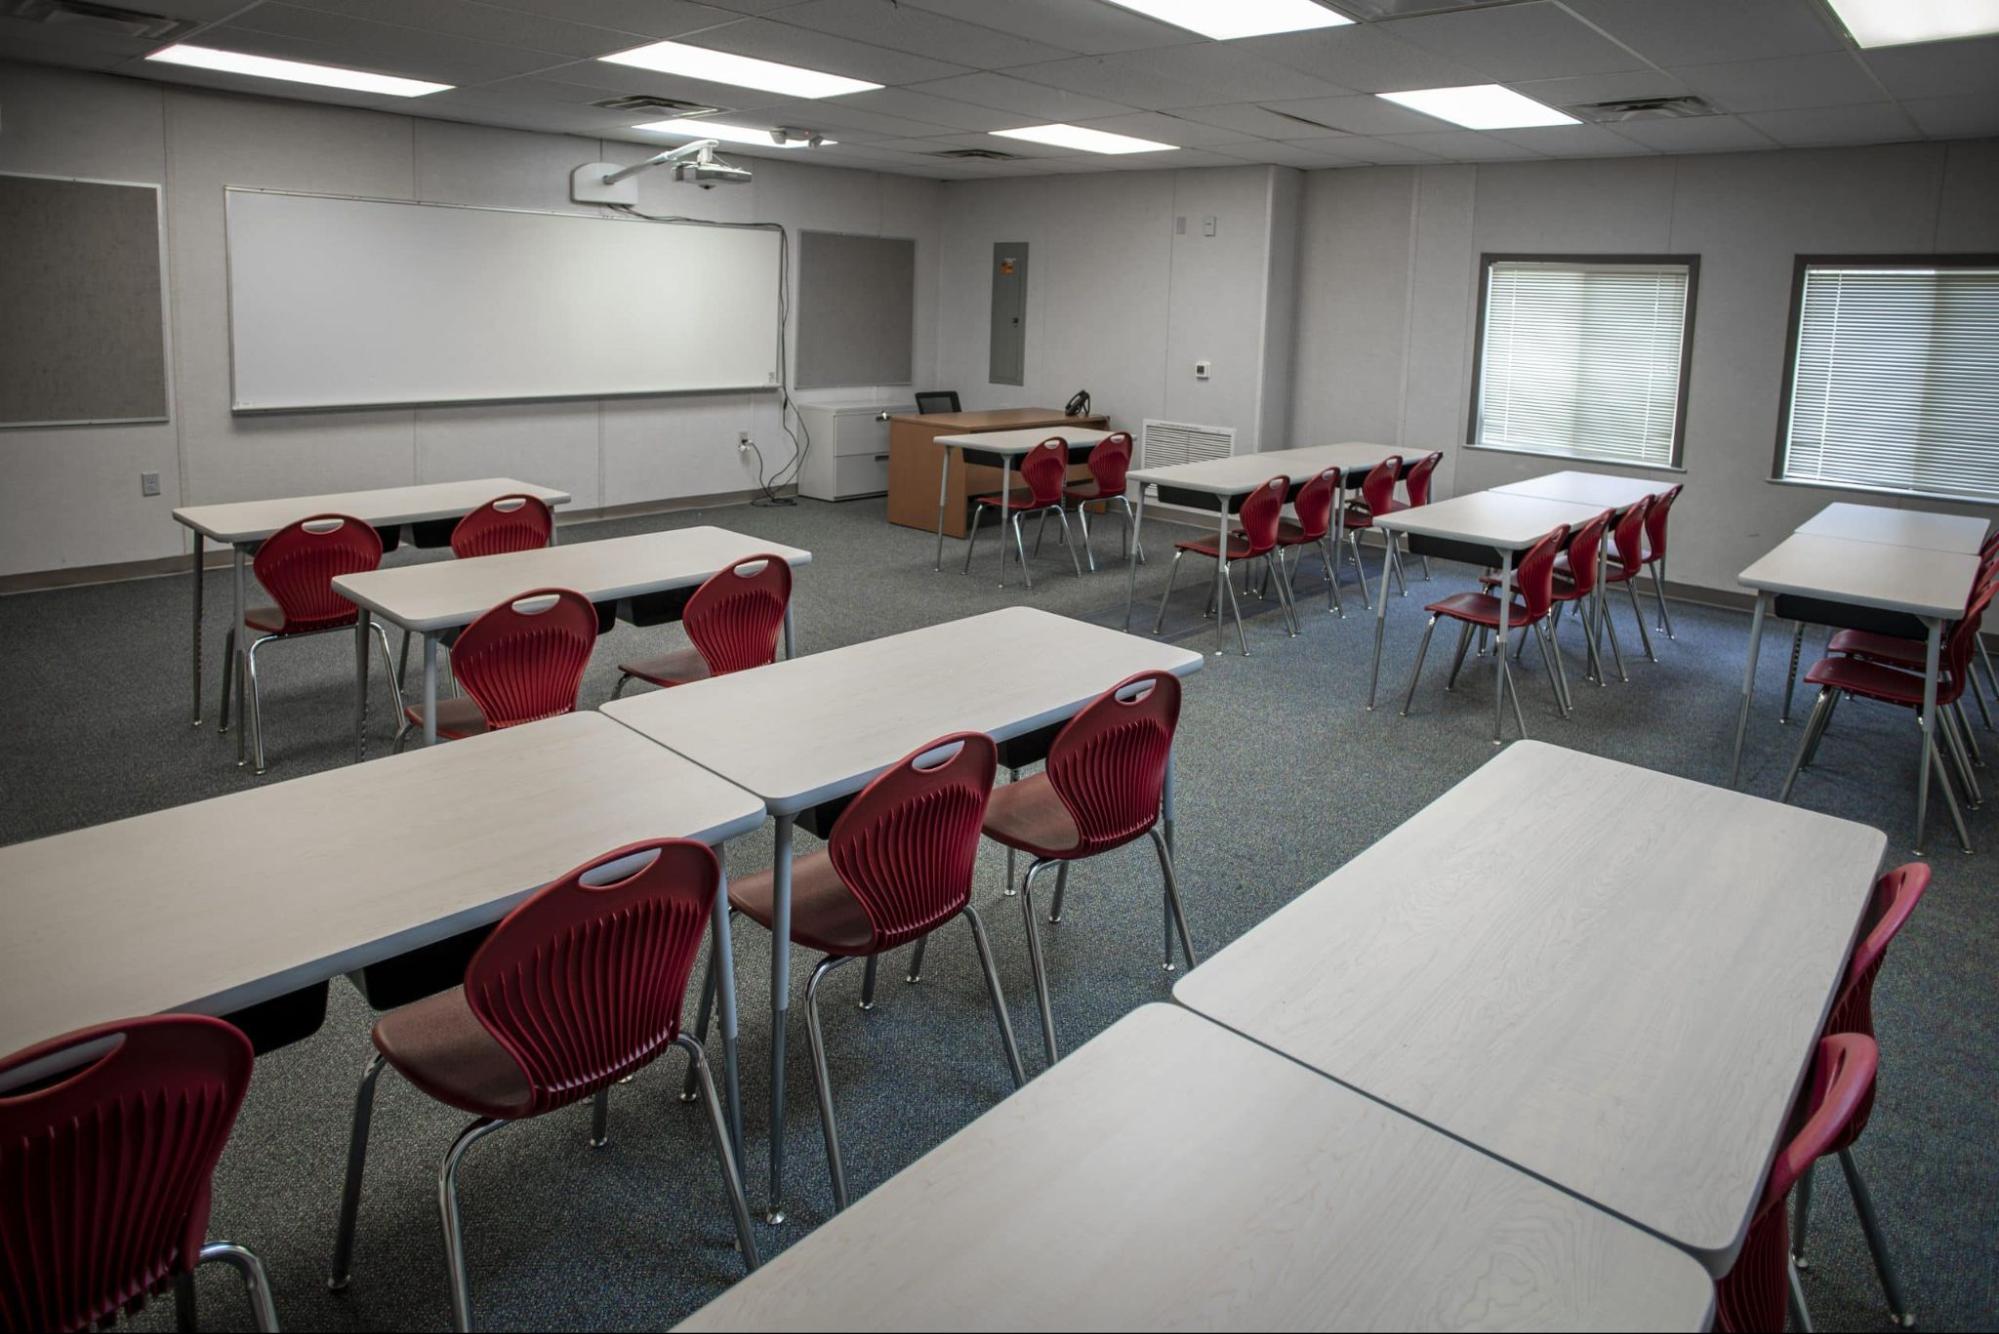 Education Purchasing Cooperatives: Portable Classrooms Solve Space Issues in Schools